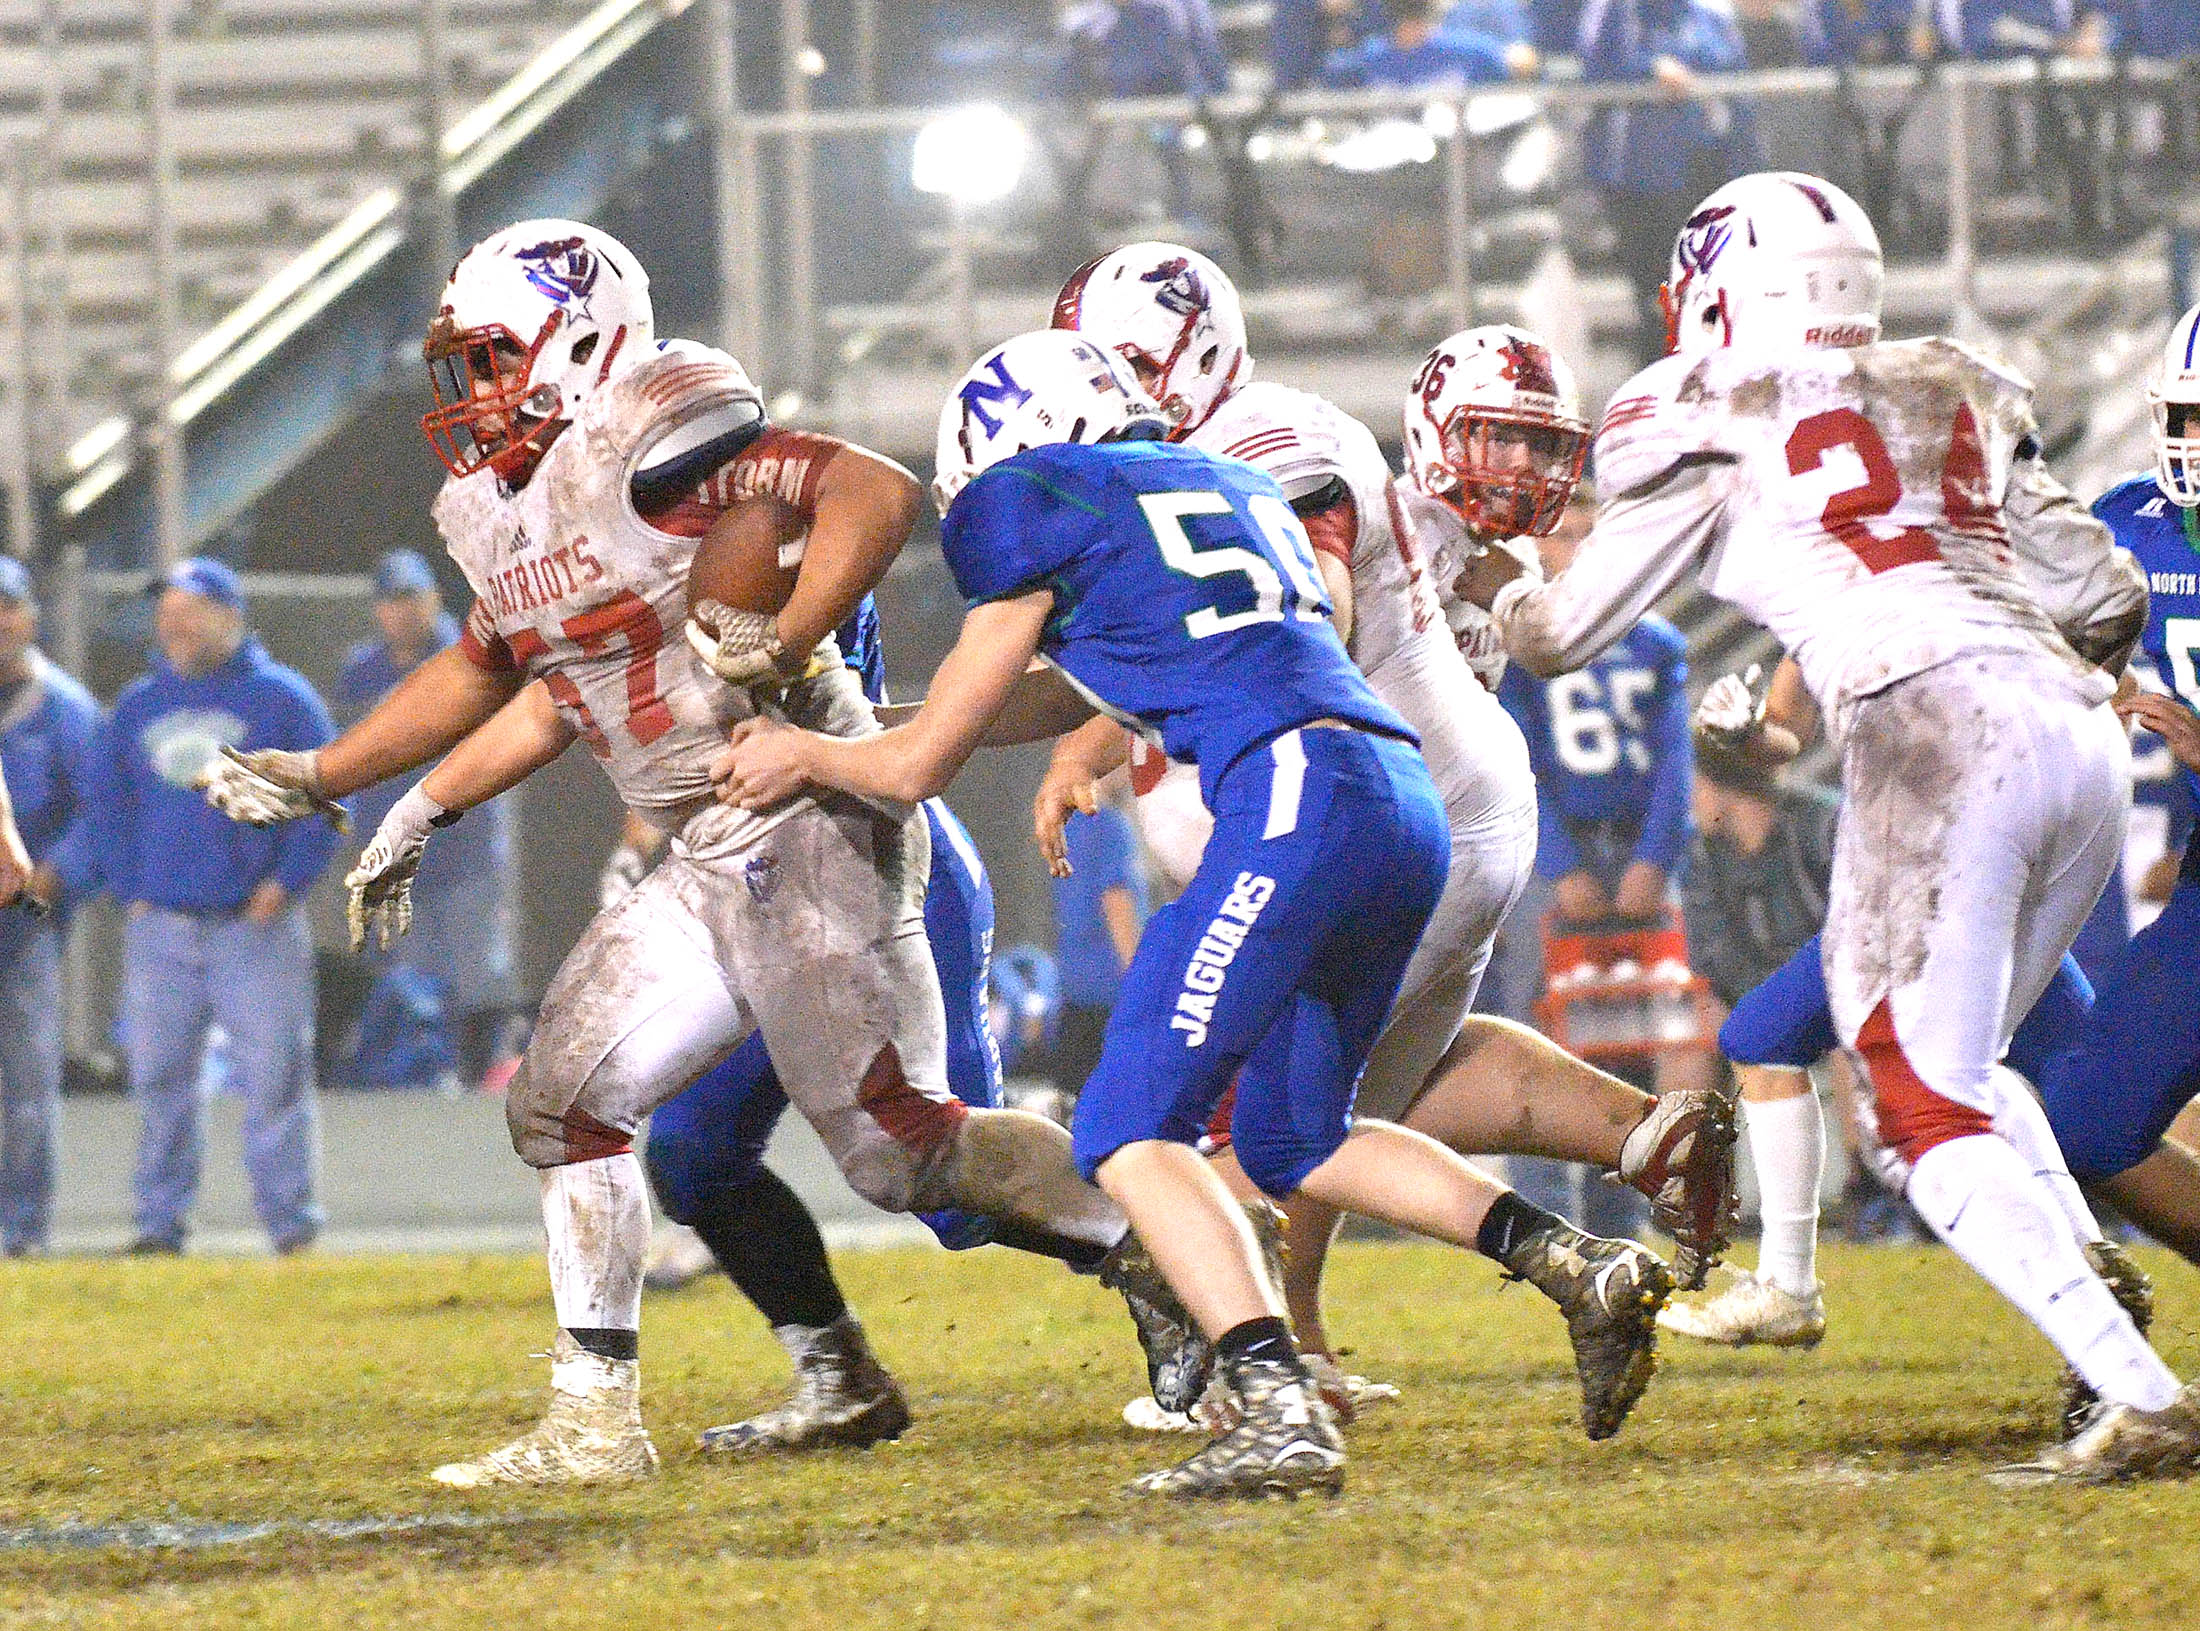 Class 5A Football playoffs Lincoln knocked out by North Laurel The